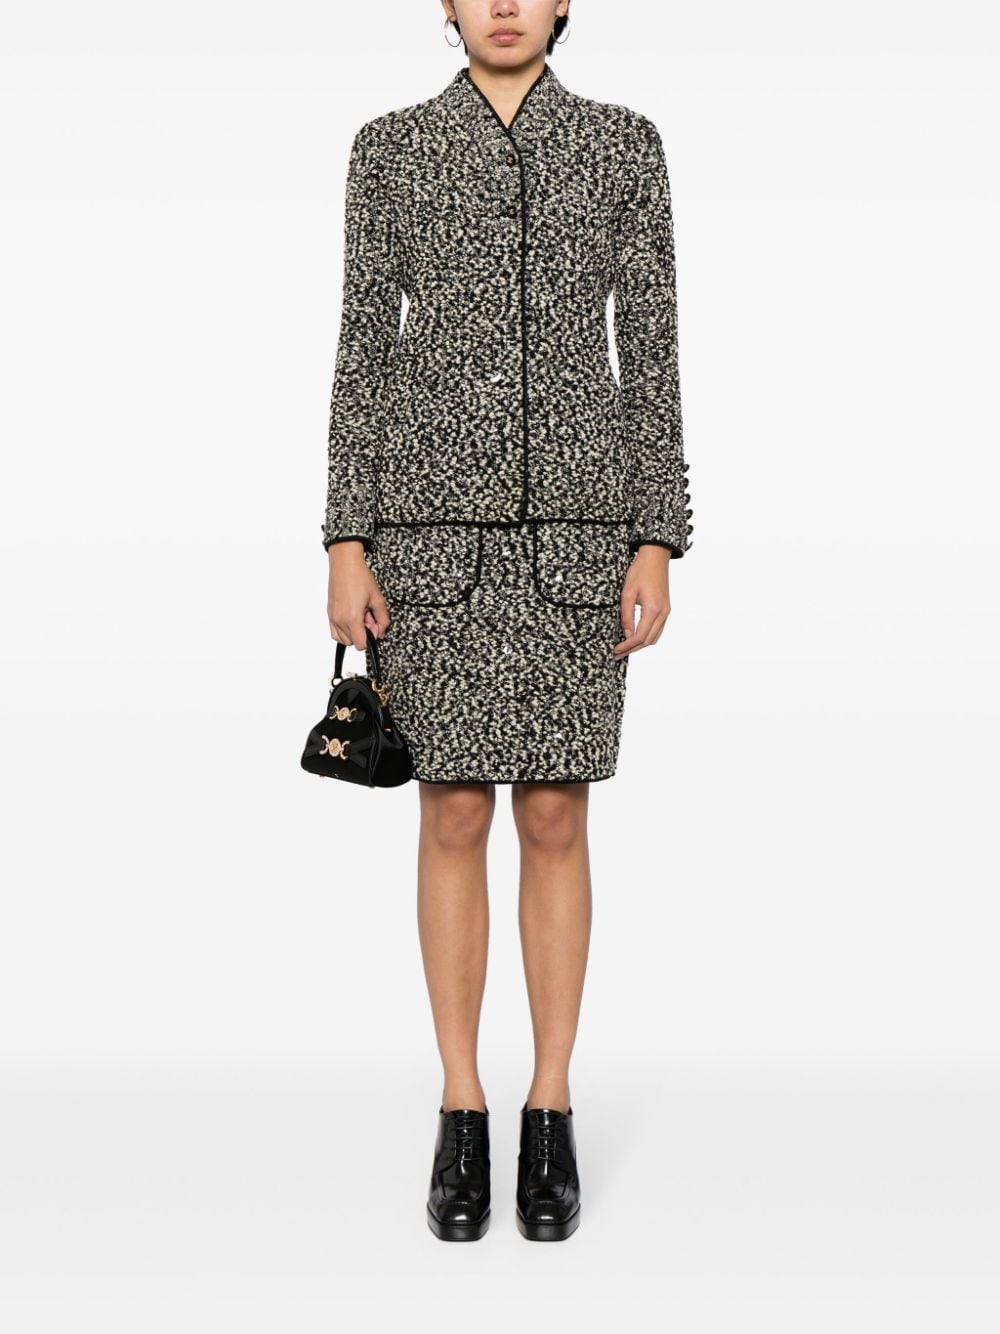 Image 2 of CHANEL Pre-Owned 1994 bouclé skirt suit